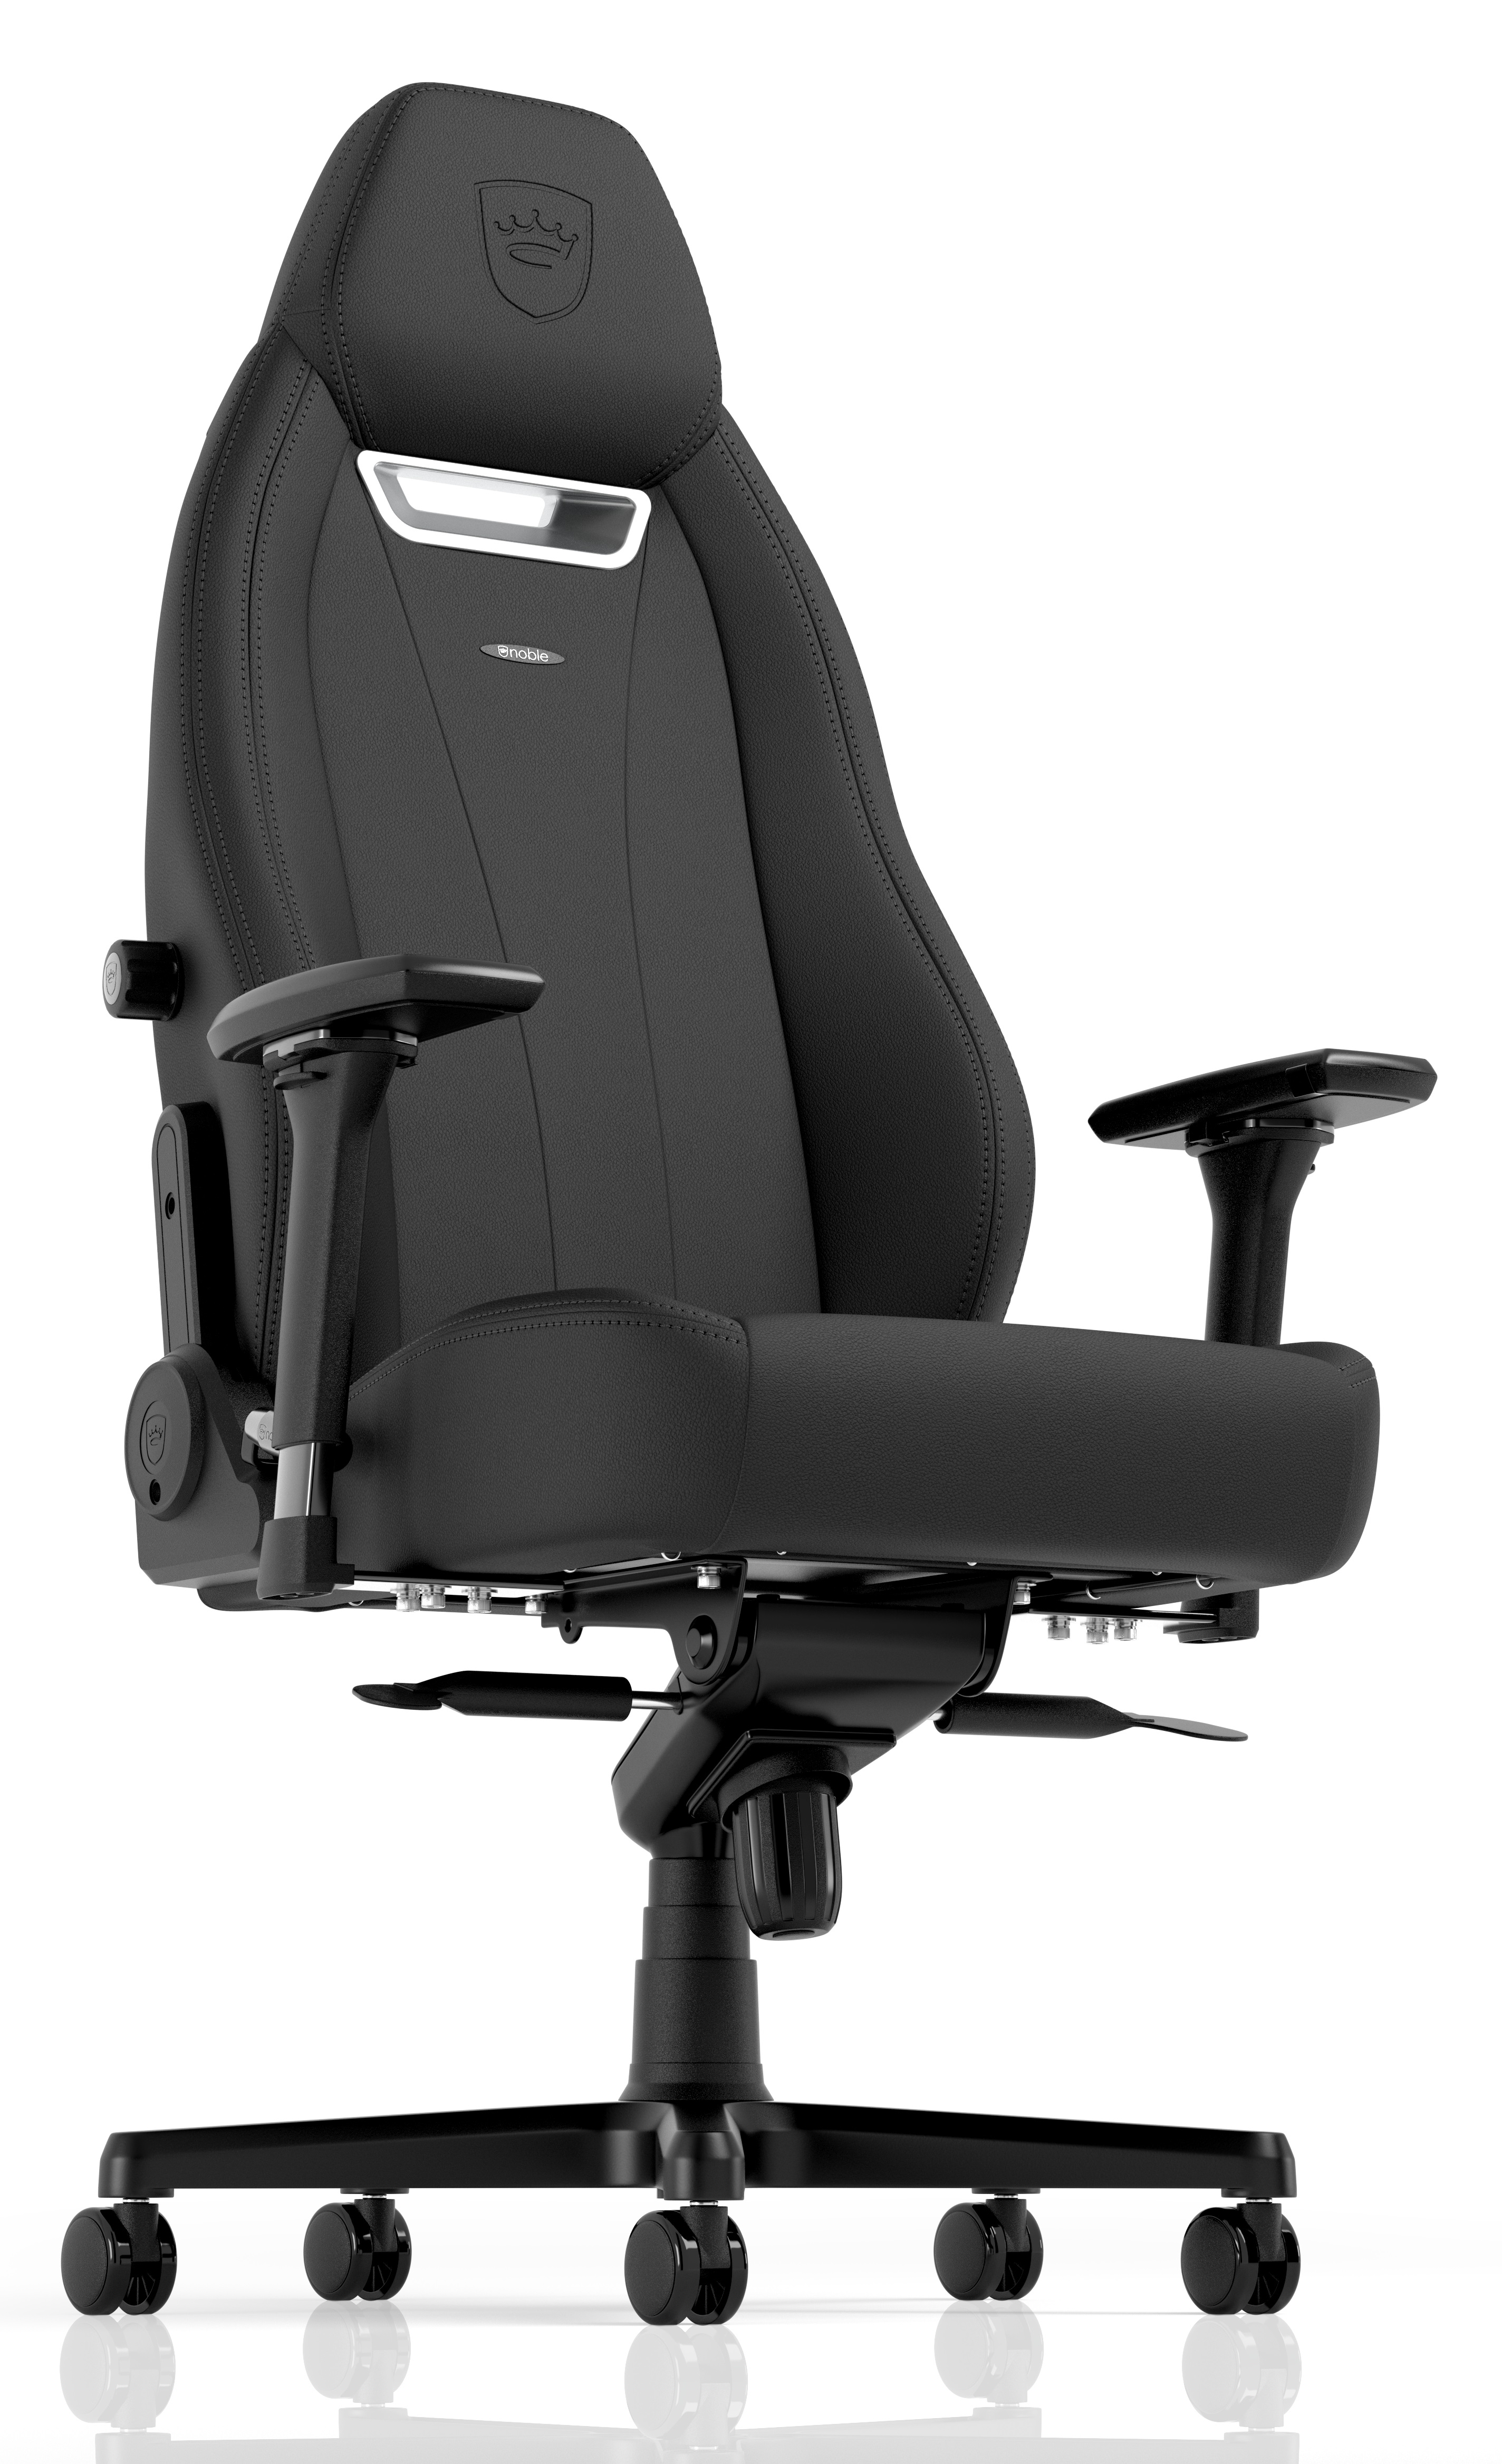 noblechairs LEGEND Gaming Chair Black Edition – High-tech PU Leather